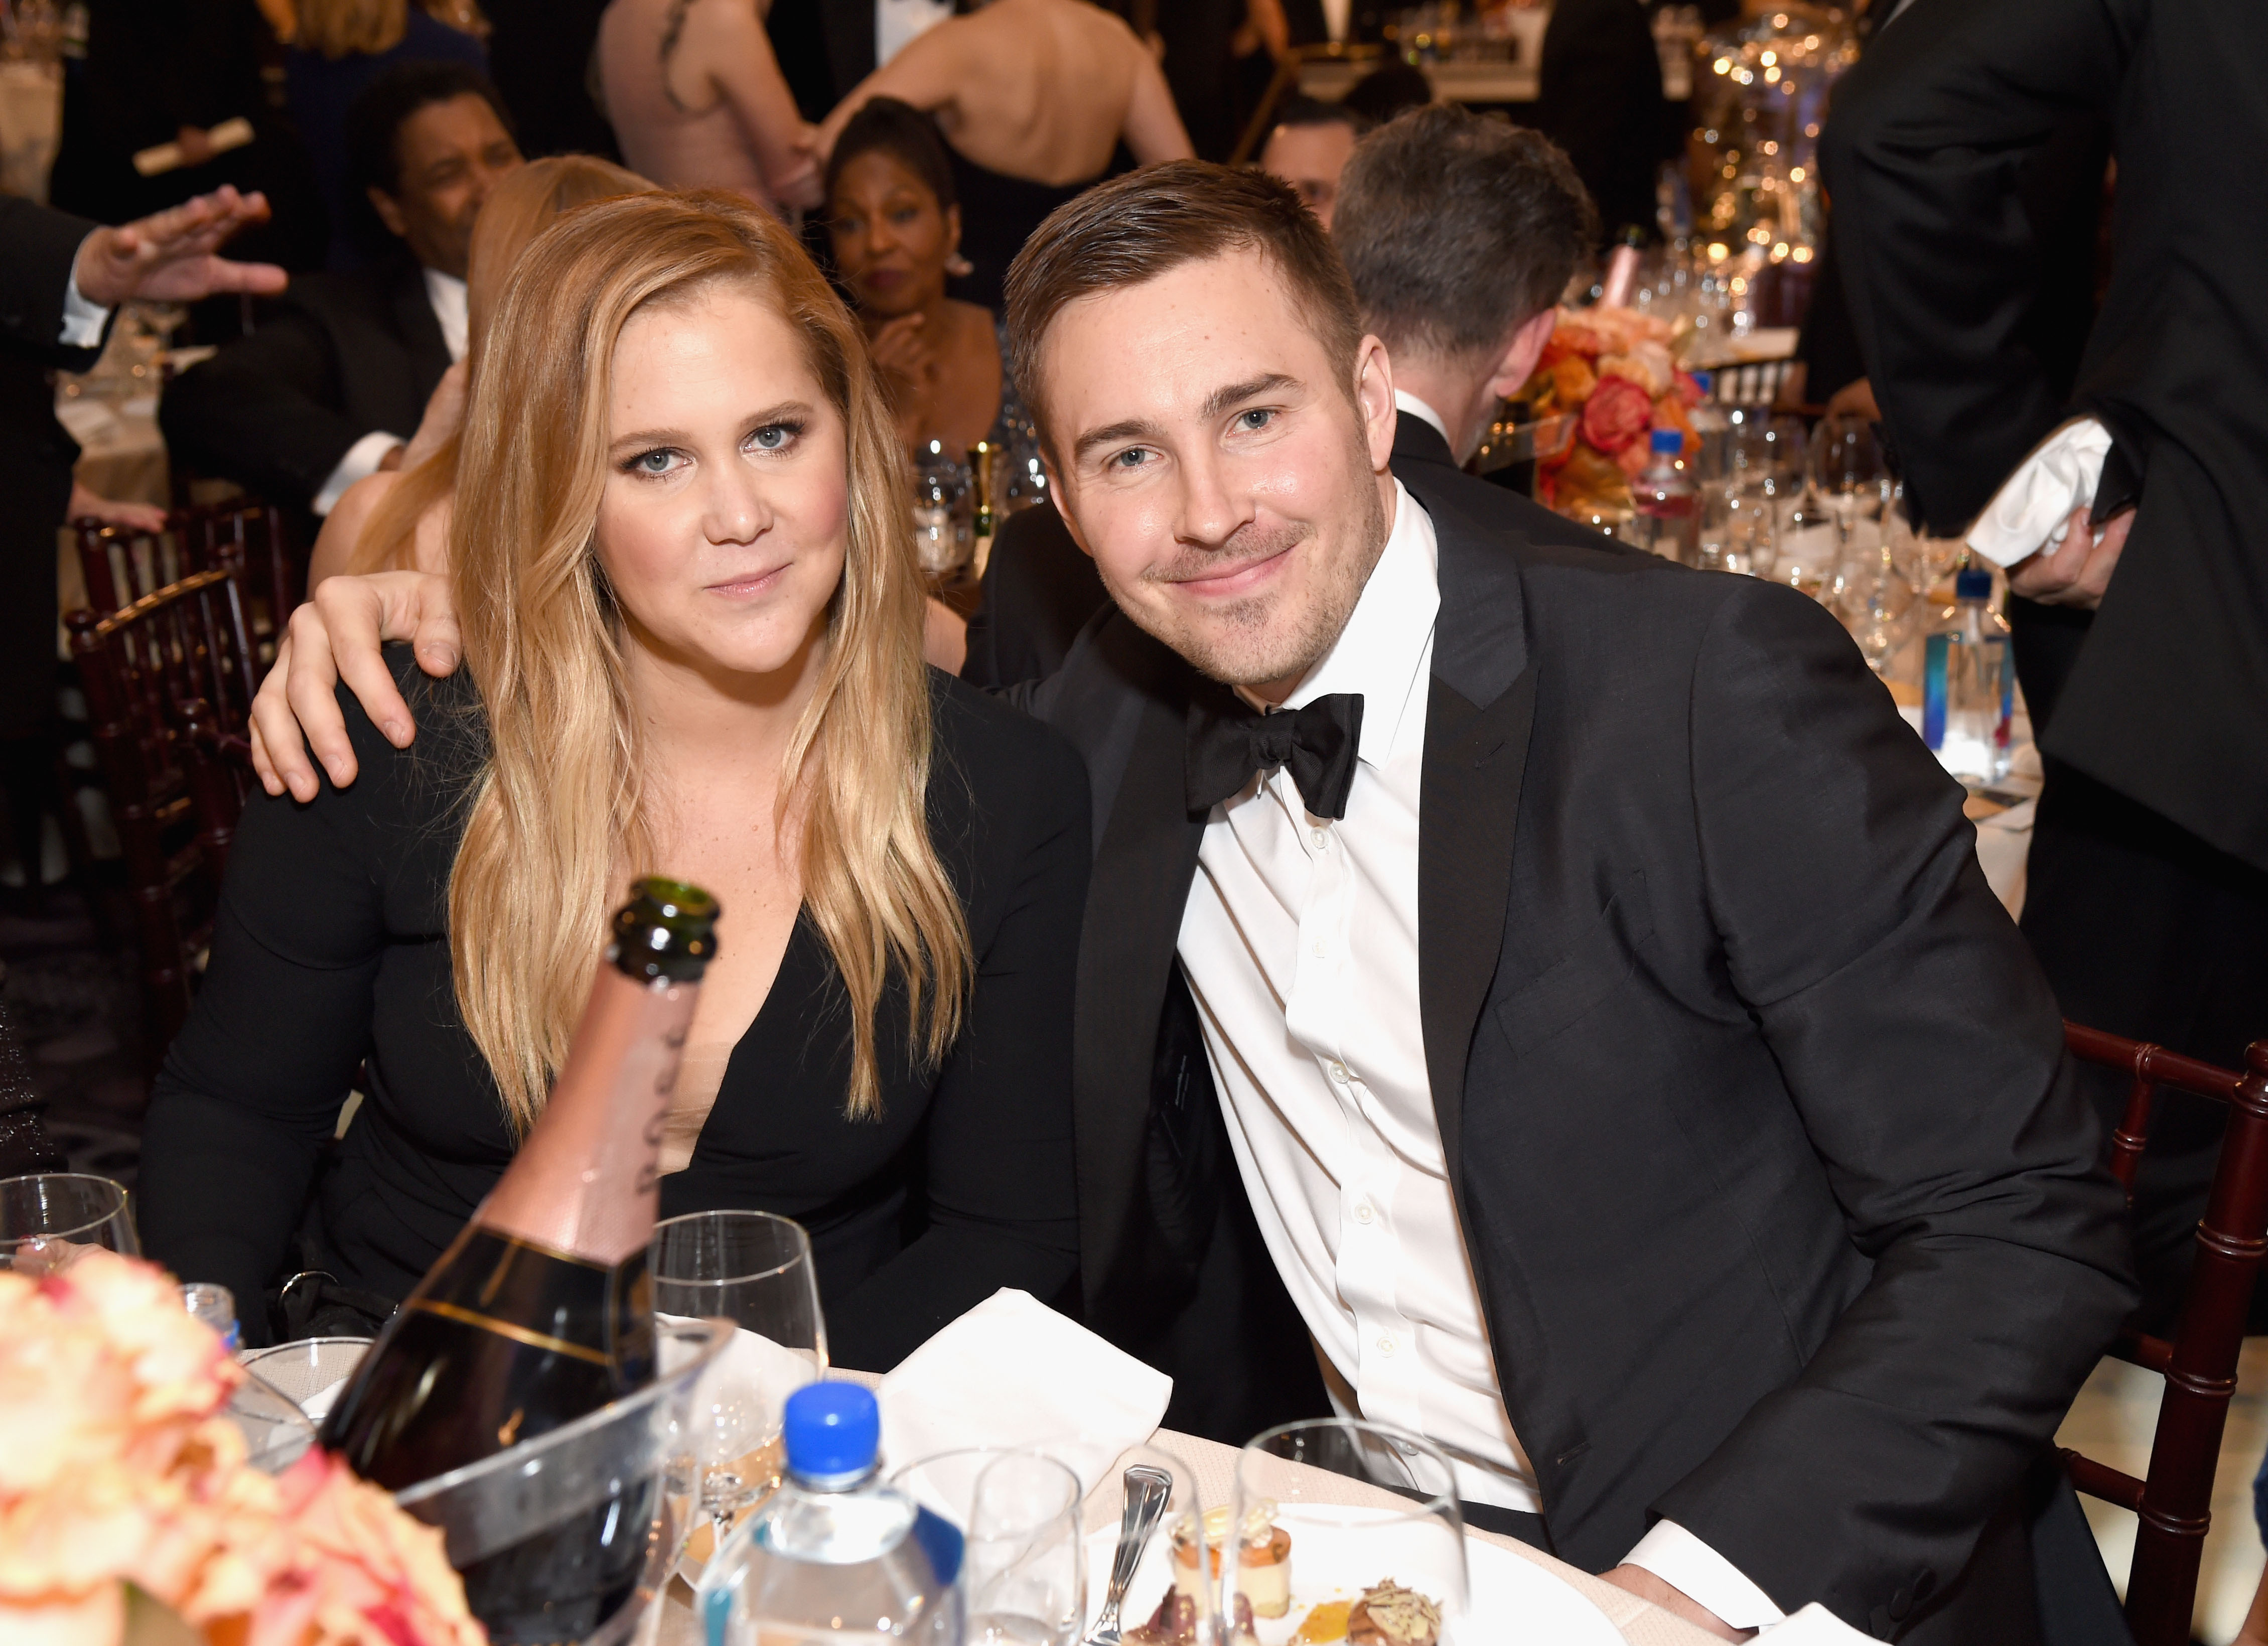 BEVERLY HILLS, CA - JANUARY 08: Actress Amy Schumer (L) and Ben Hanisch attend the 74th Annual Golden Globe Awards at The Beverly Hilton Hotel on January 8, 2017 in Beverly Hills, California.  (Photo by Michael Kovac/Getty Images for Moet &amp; Chandon ) (Michael Kovac—Getty Images for Moet; Chandon)